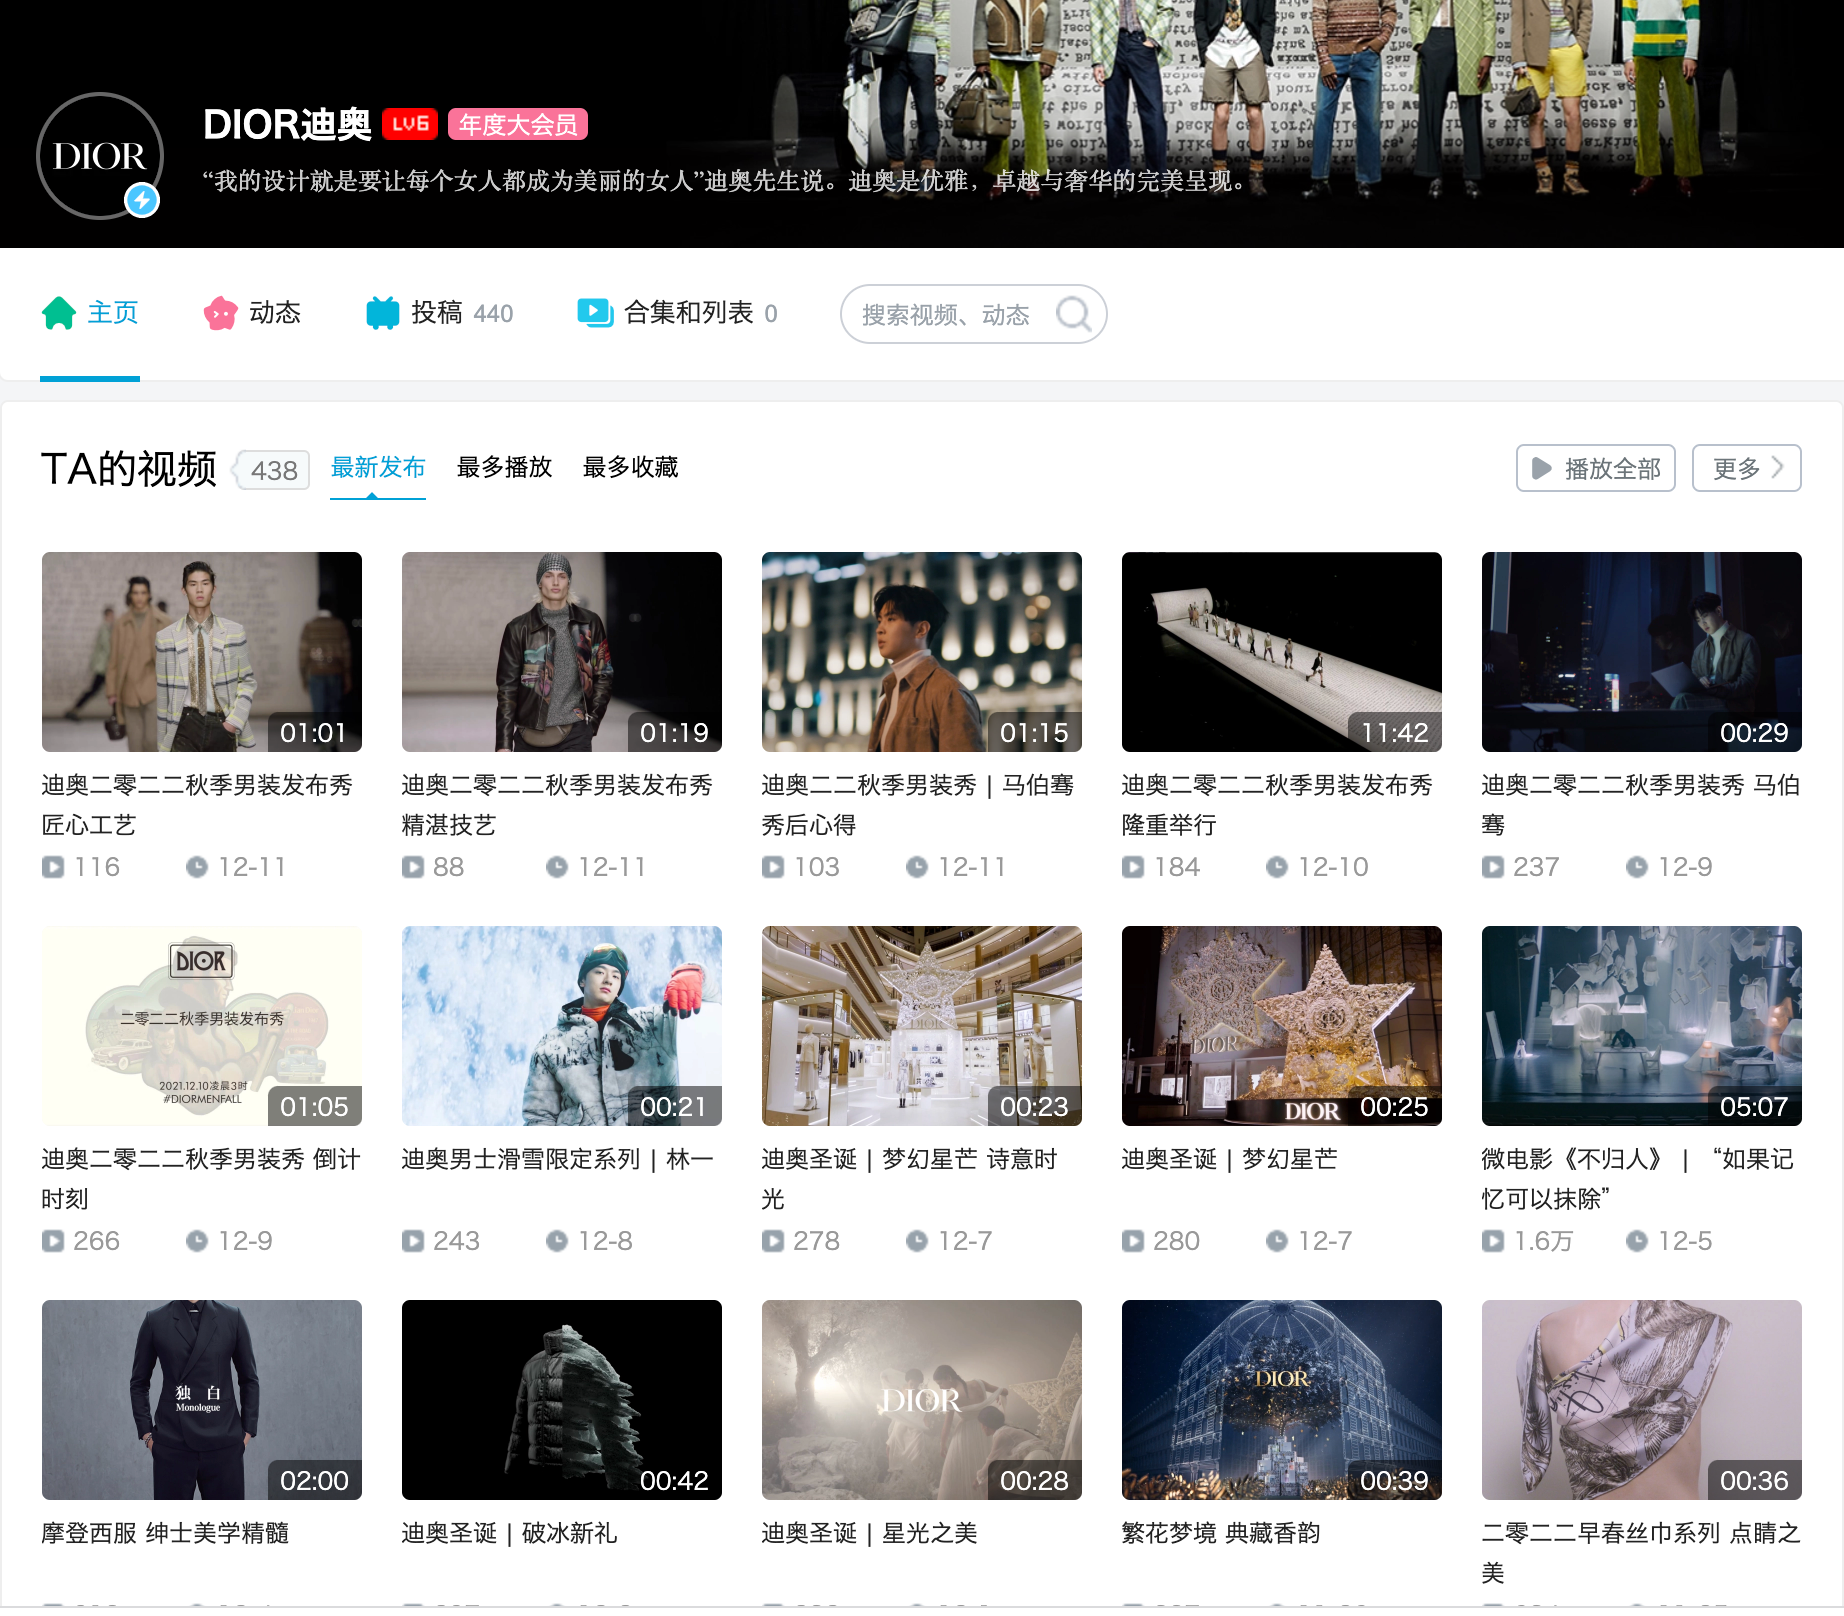 Bilibili's young user base has enticed luxury brands like Dior to set up official accounts. Image: Bilibili